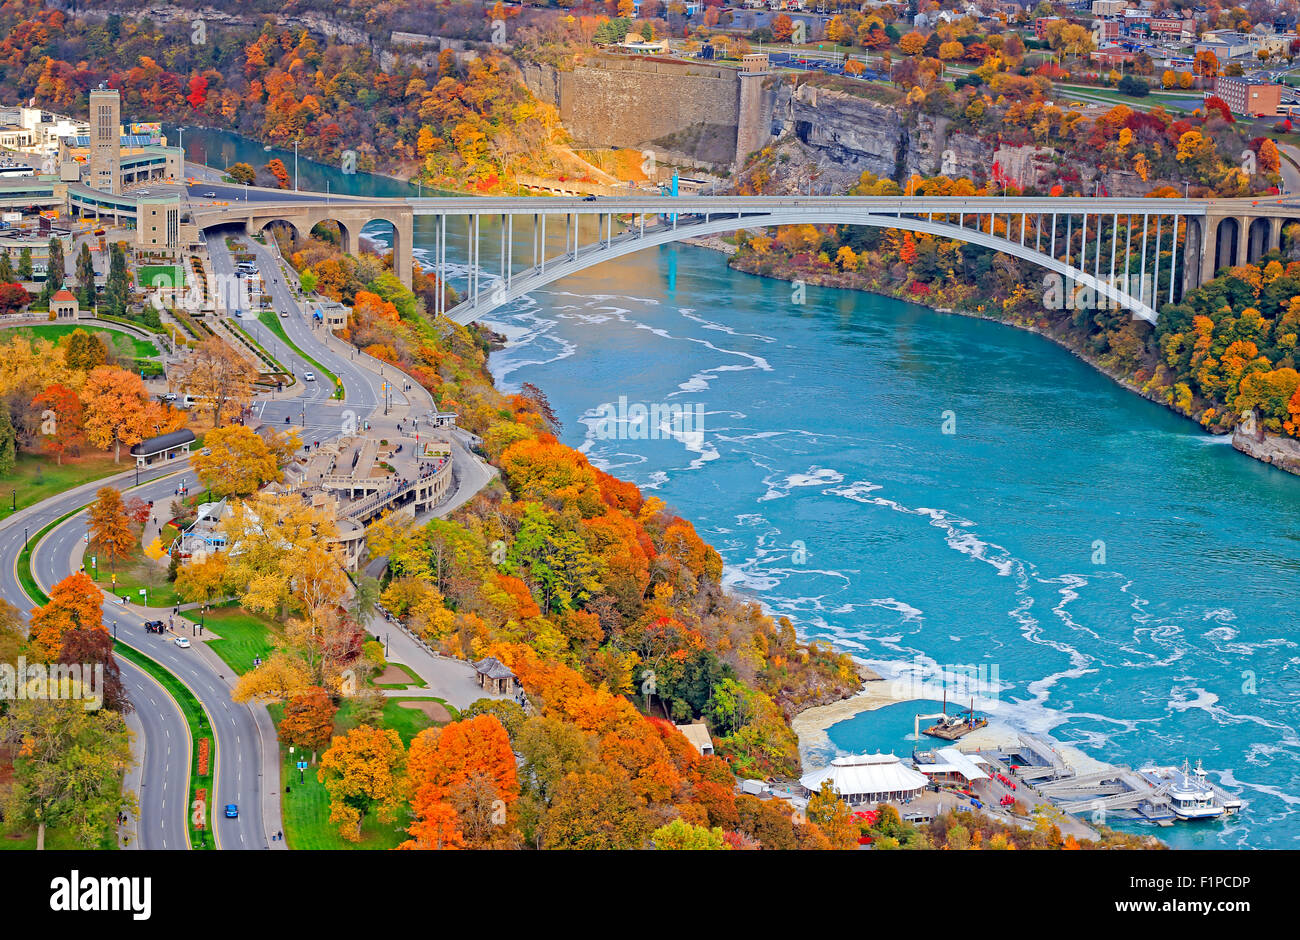 Rainbow Bridge Over Niagara River with fall colors in Canada and American side of the gorge. Stock Photo